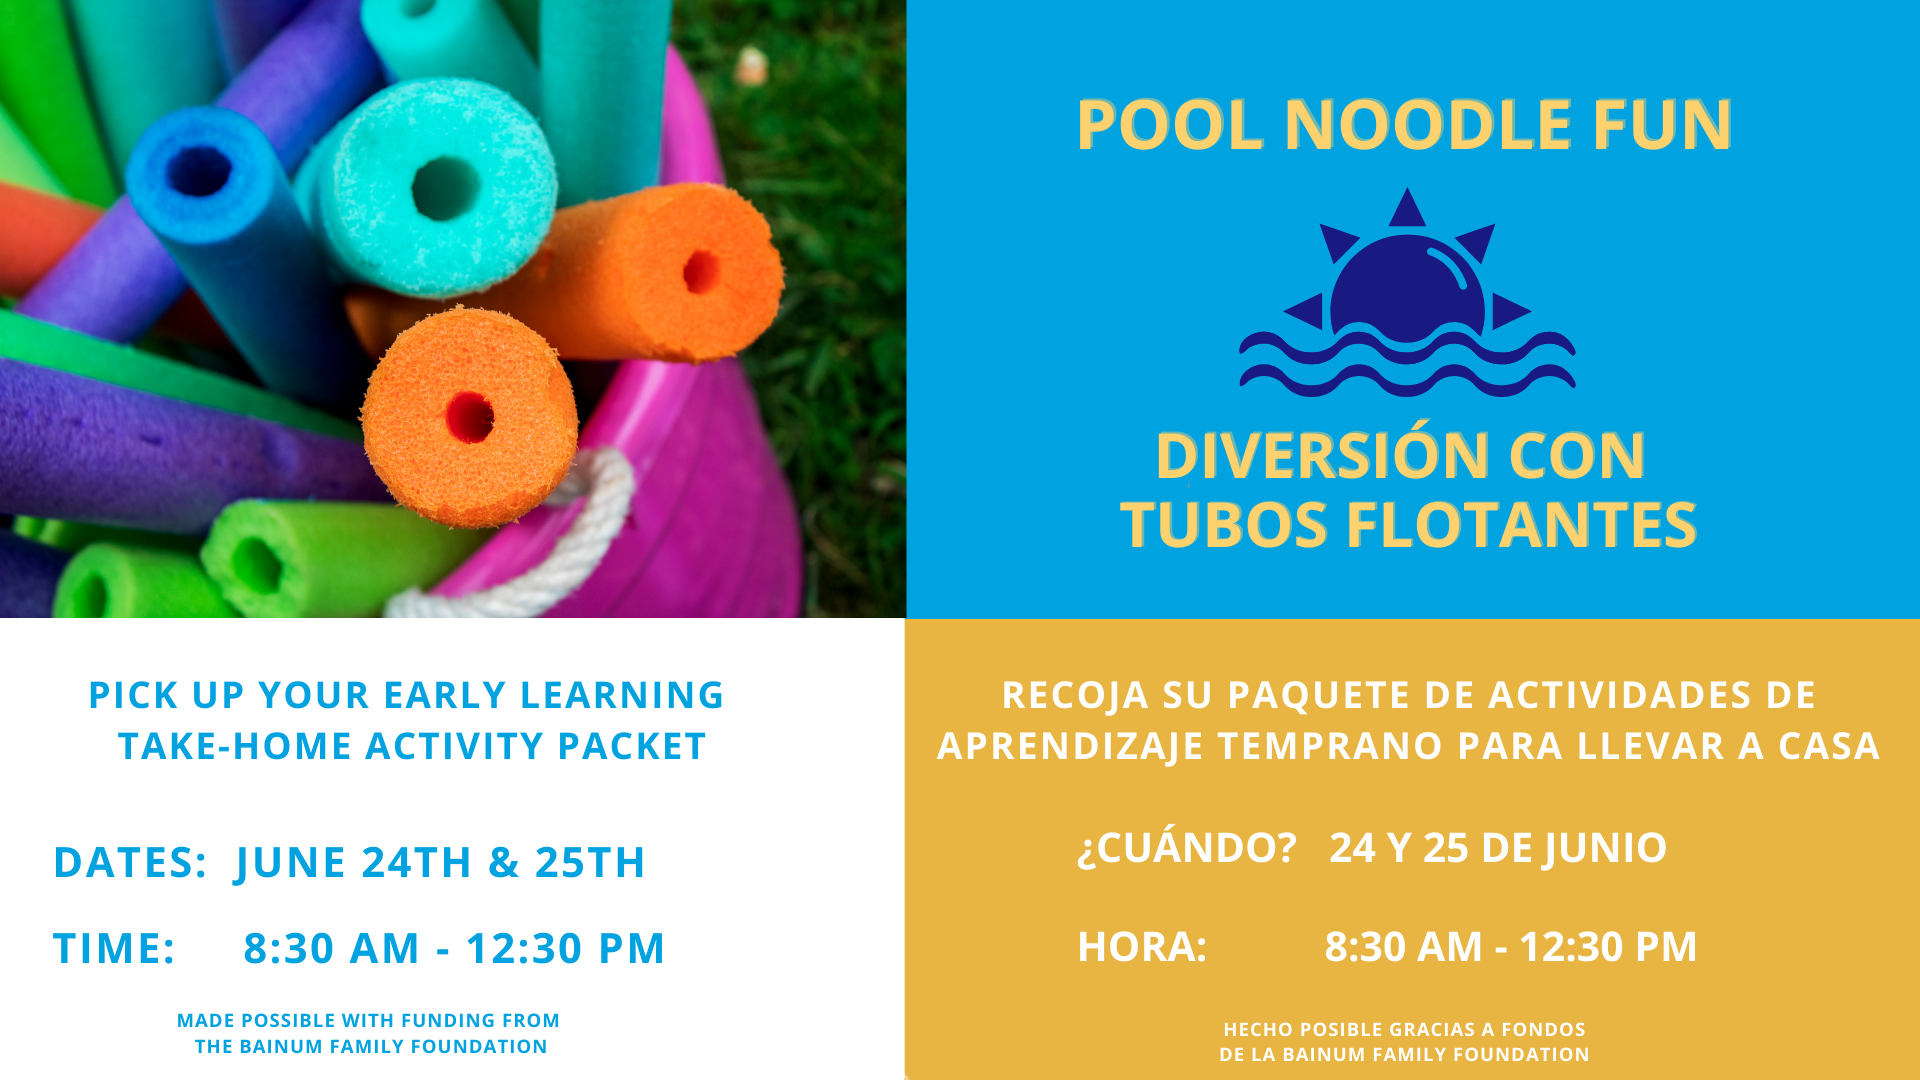 Early Learning Take-Home Activity - Pool Noodle Fun - Community Resources  for Children (CRC)